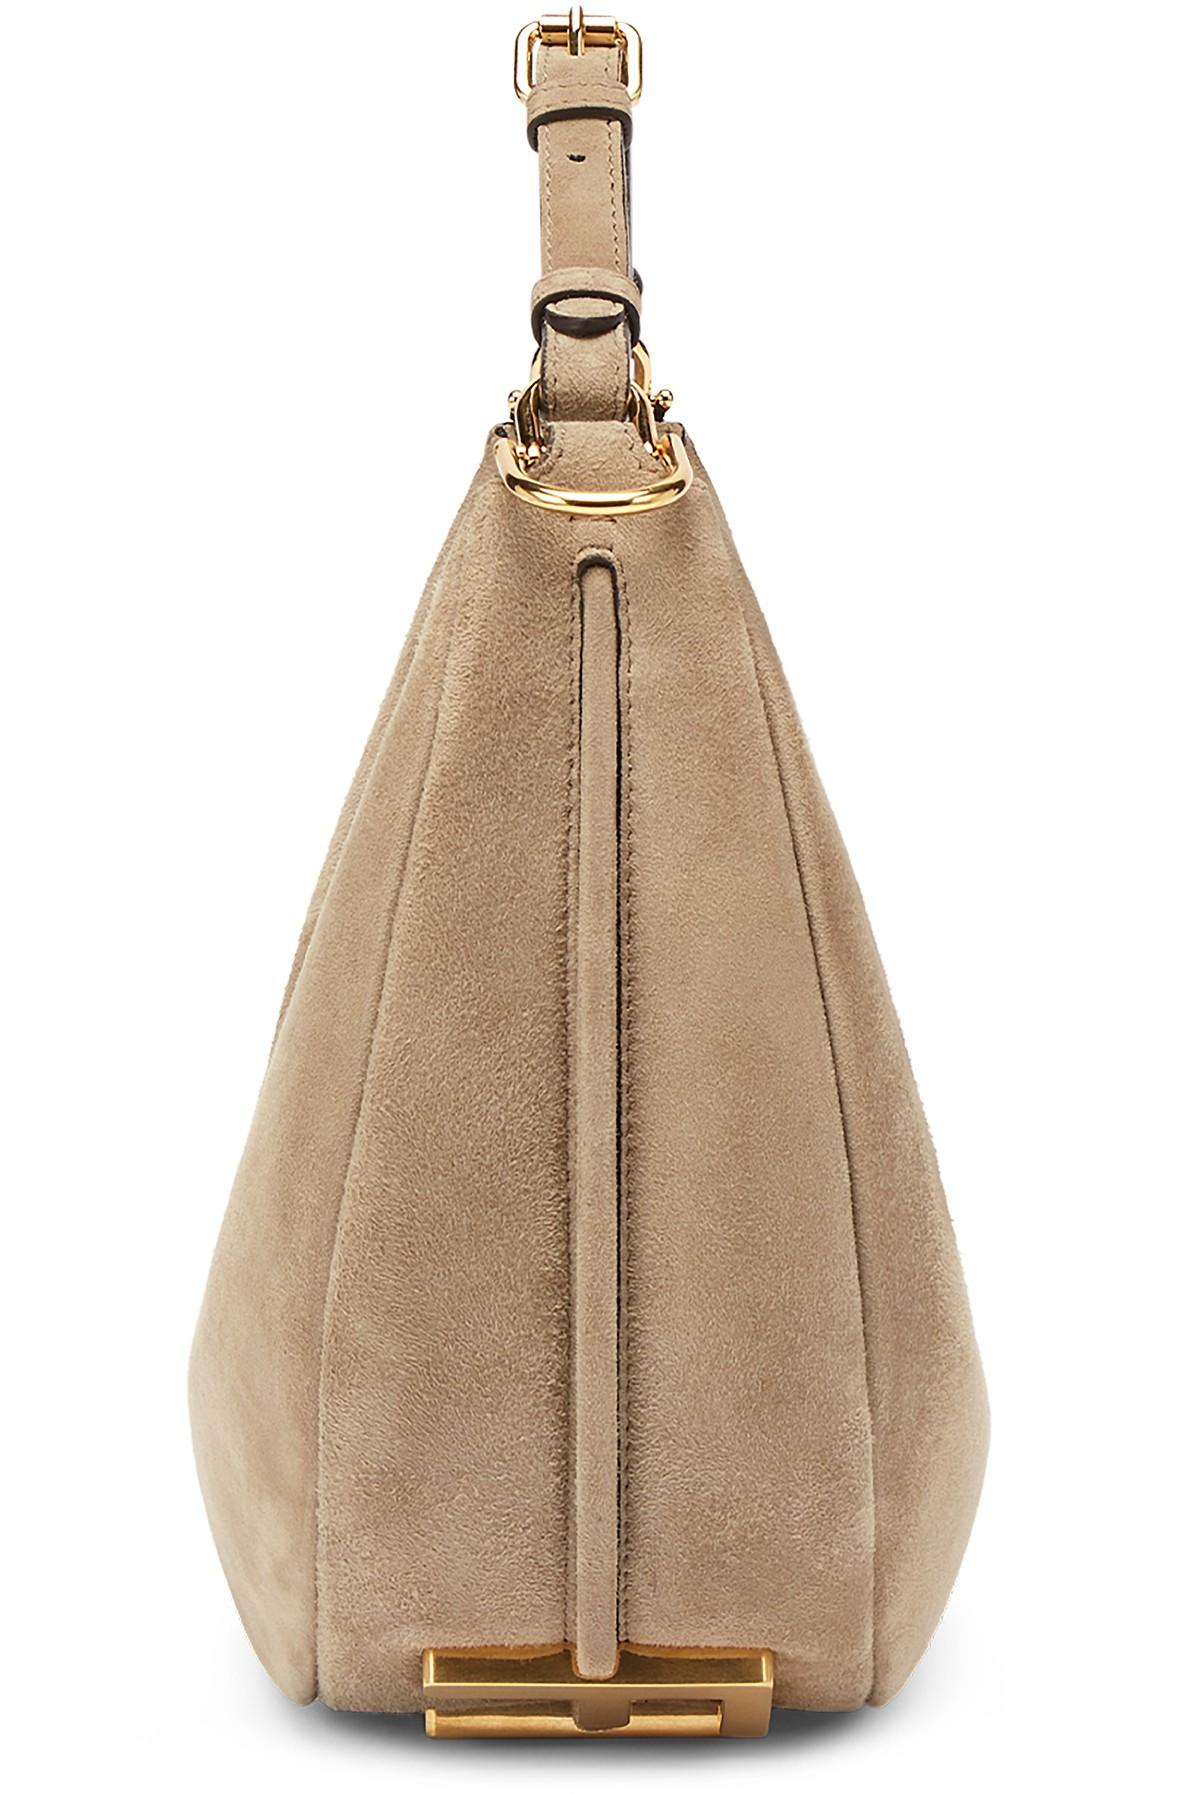 Fendigraphy Small Leather Tote Bag in Beige - Fendi